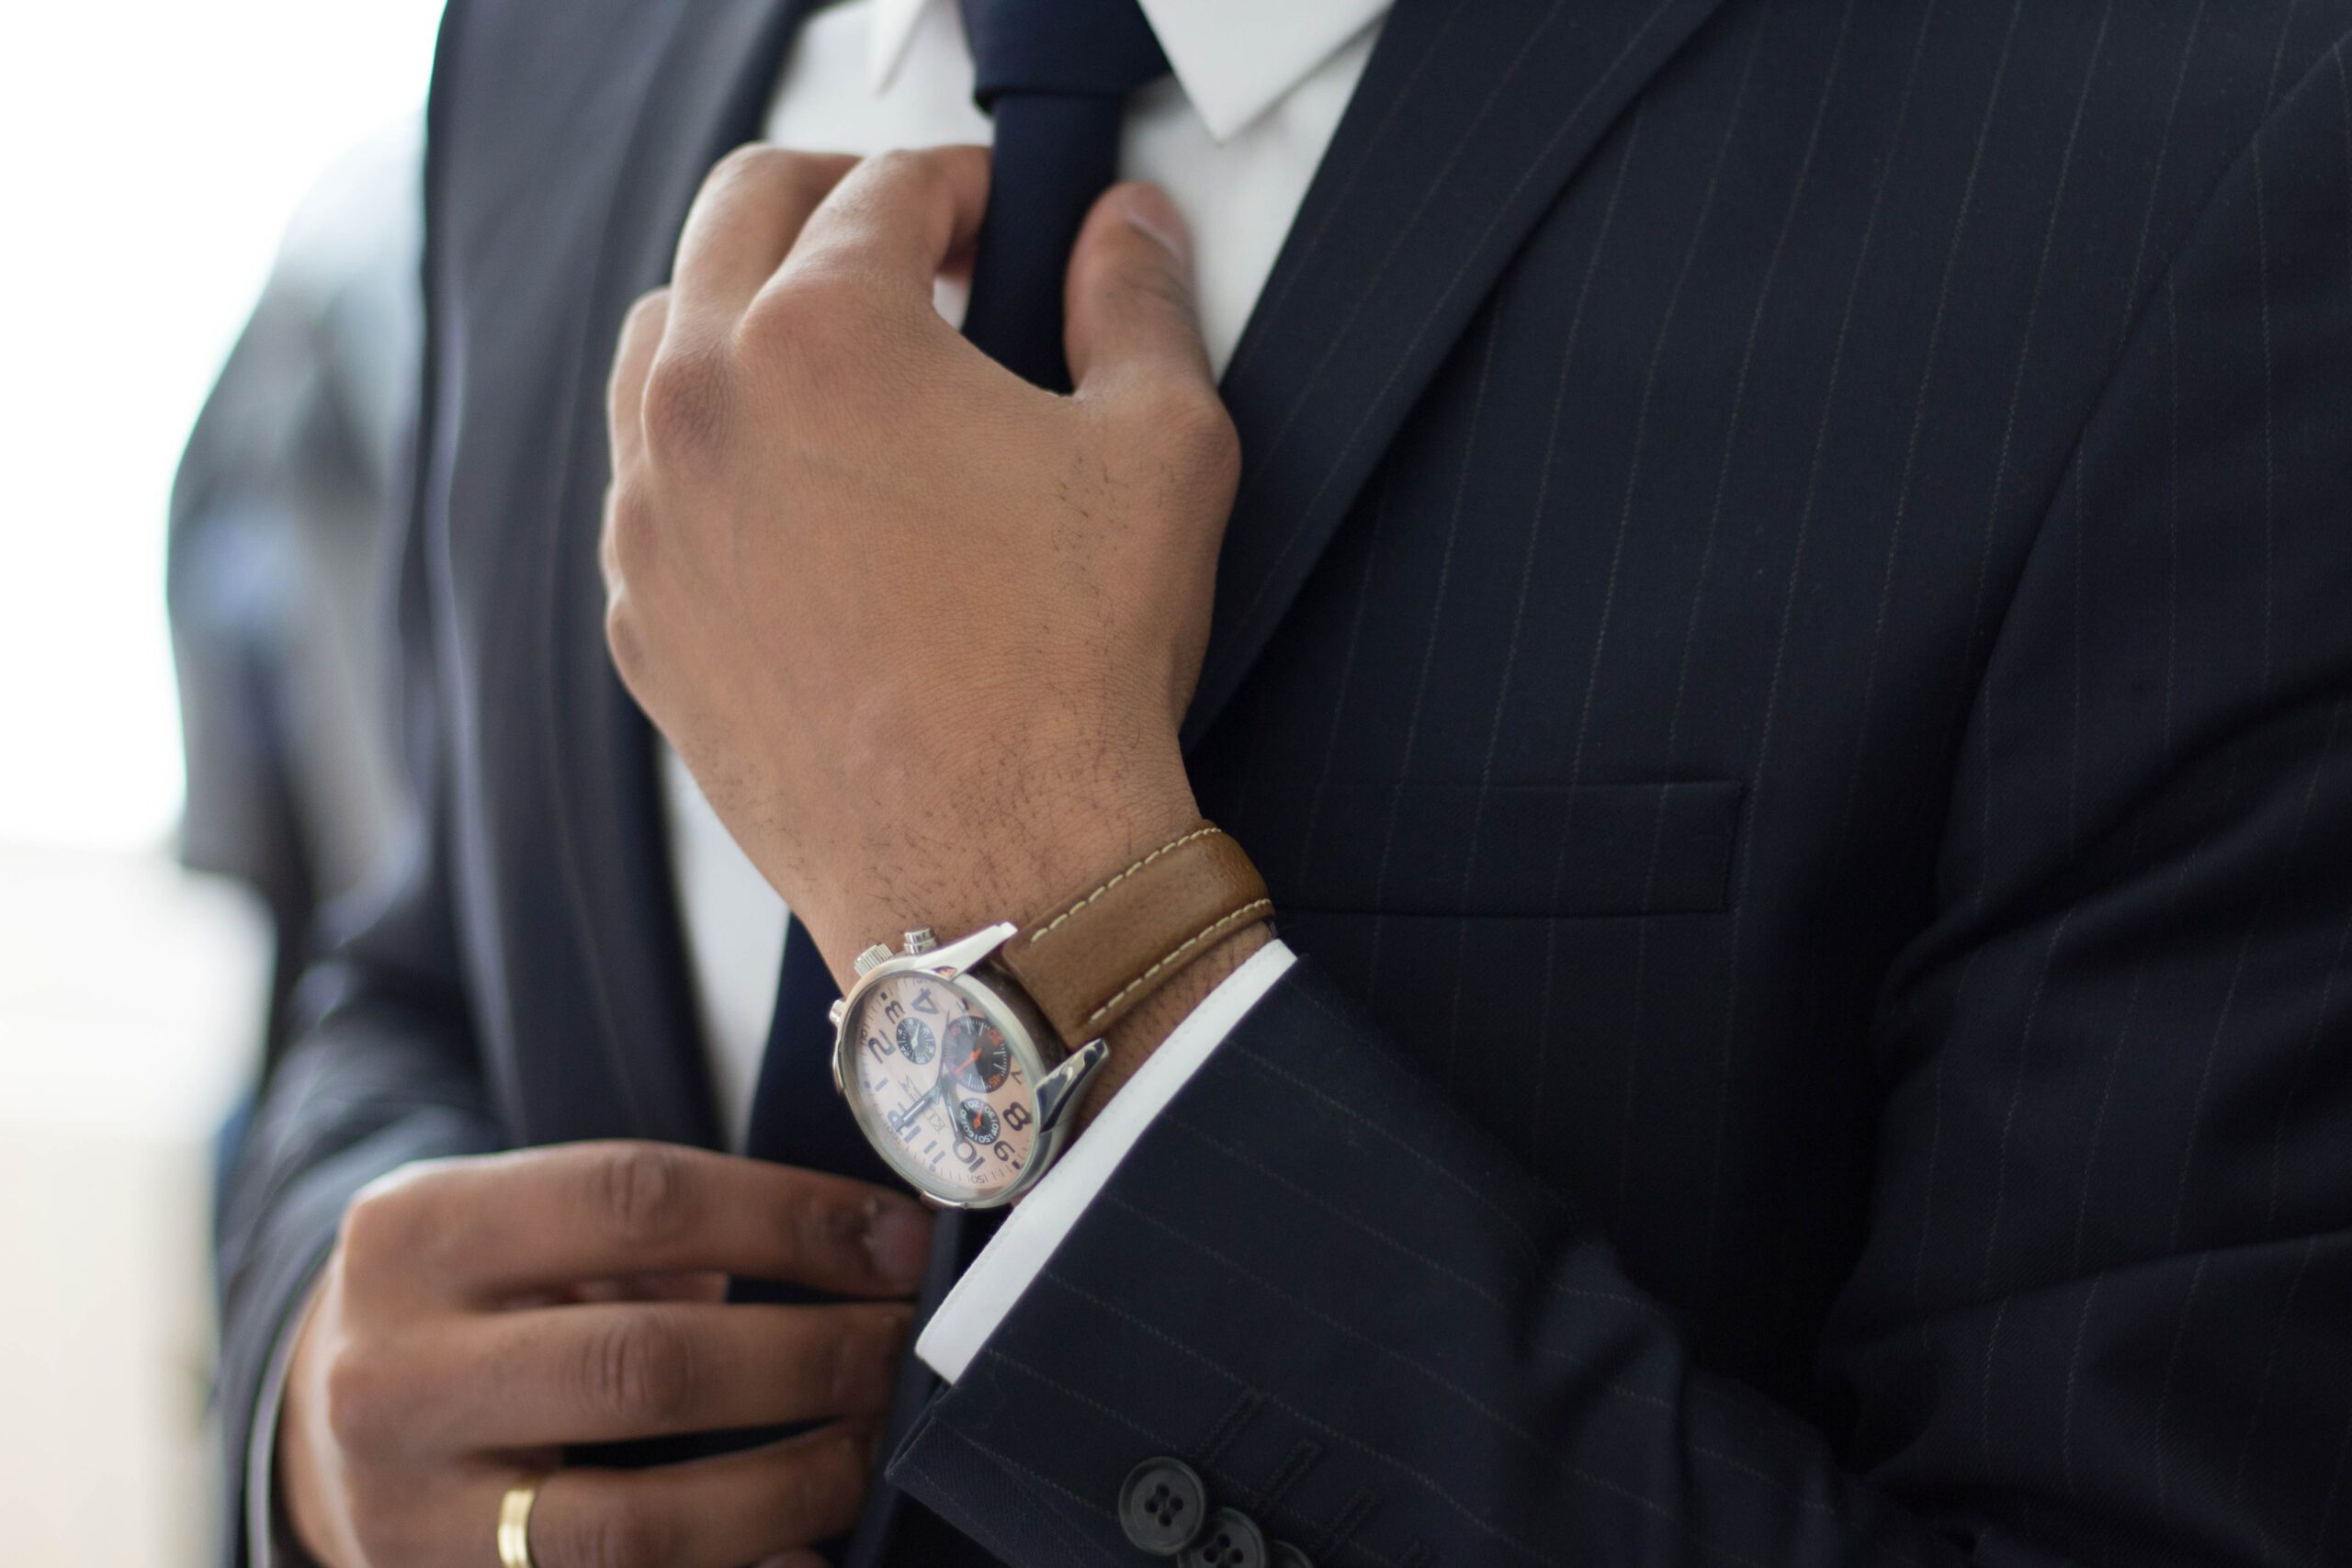 Dress for Success: What You Should Wear to the Workplace